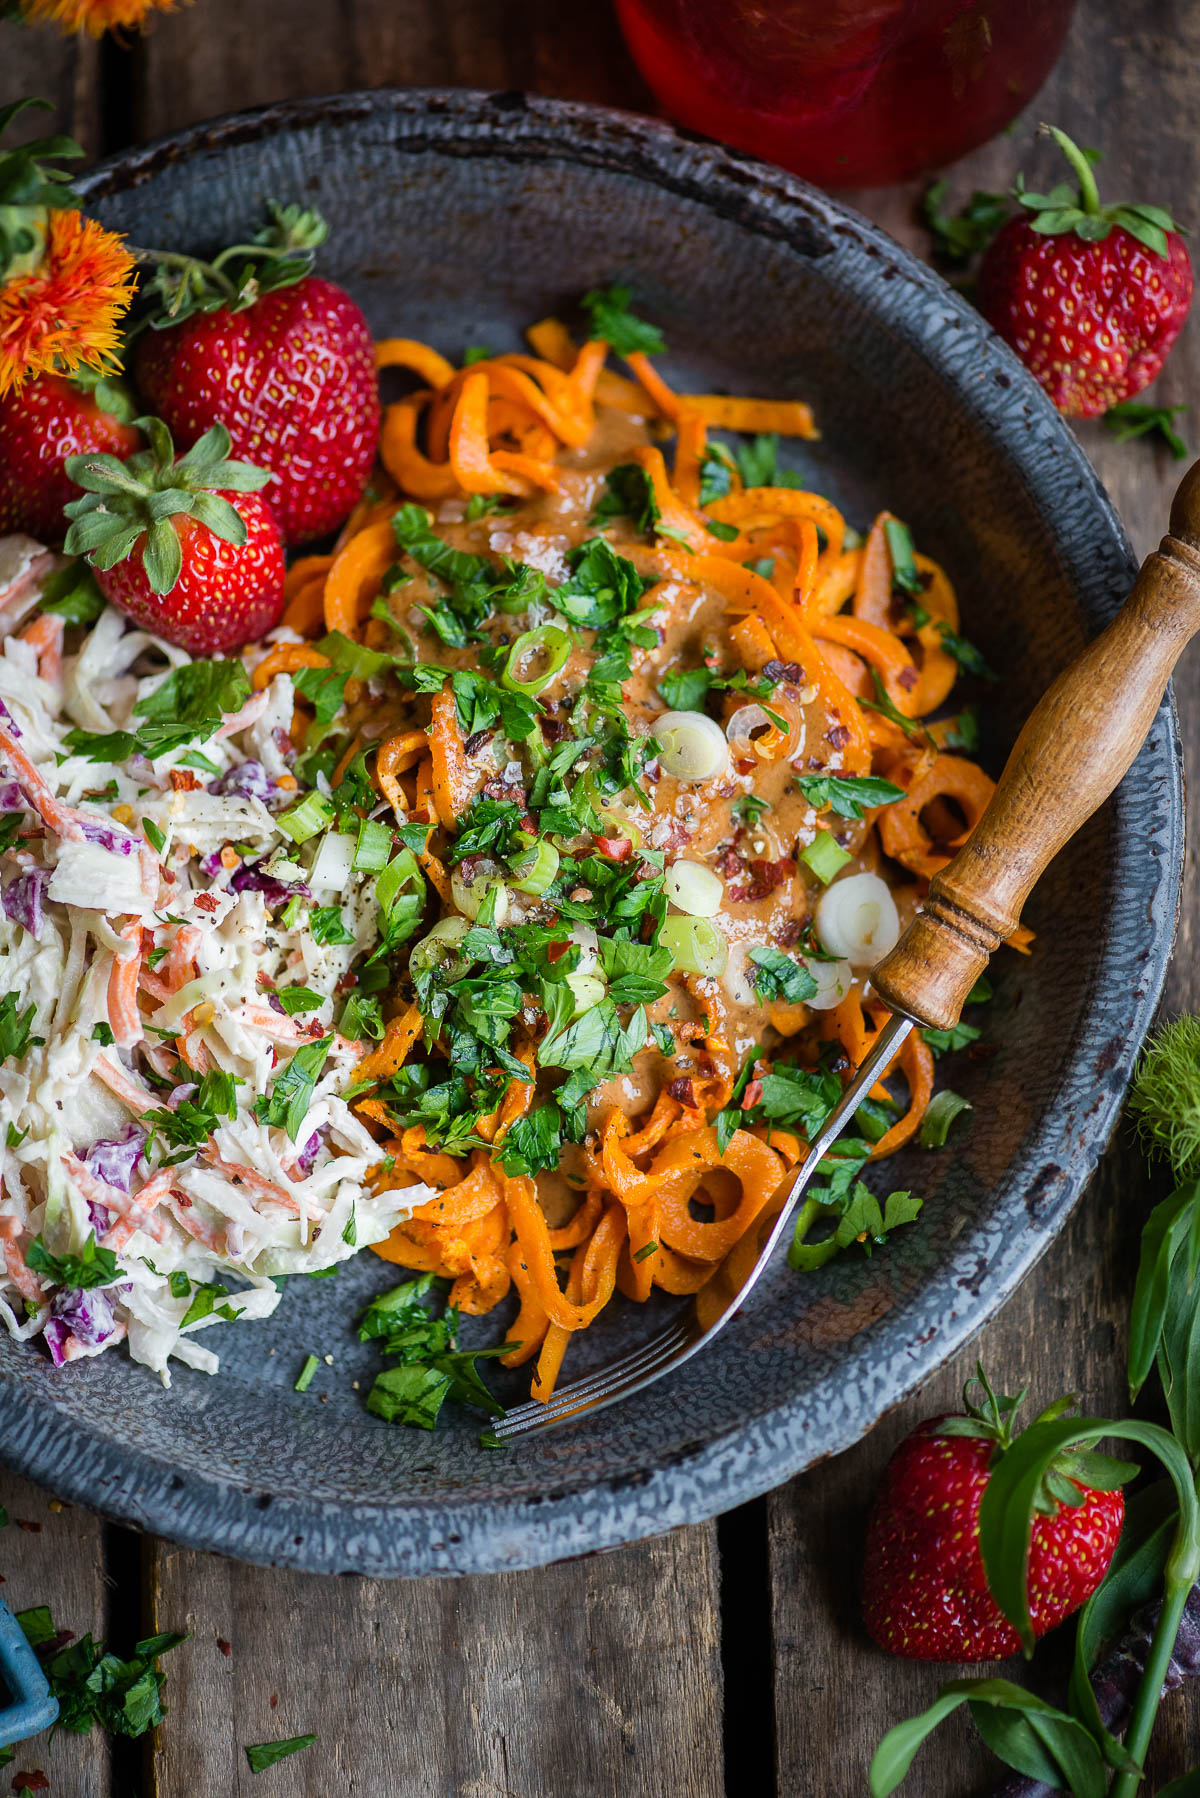 Bowl of gluten-free noodles made from sweet potatoes and topped with coleslaw and fresh strawberries. Wooden fork on the side.